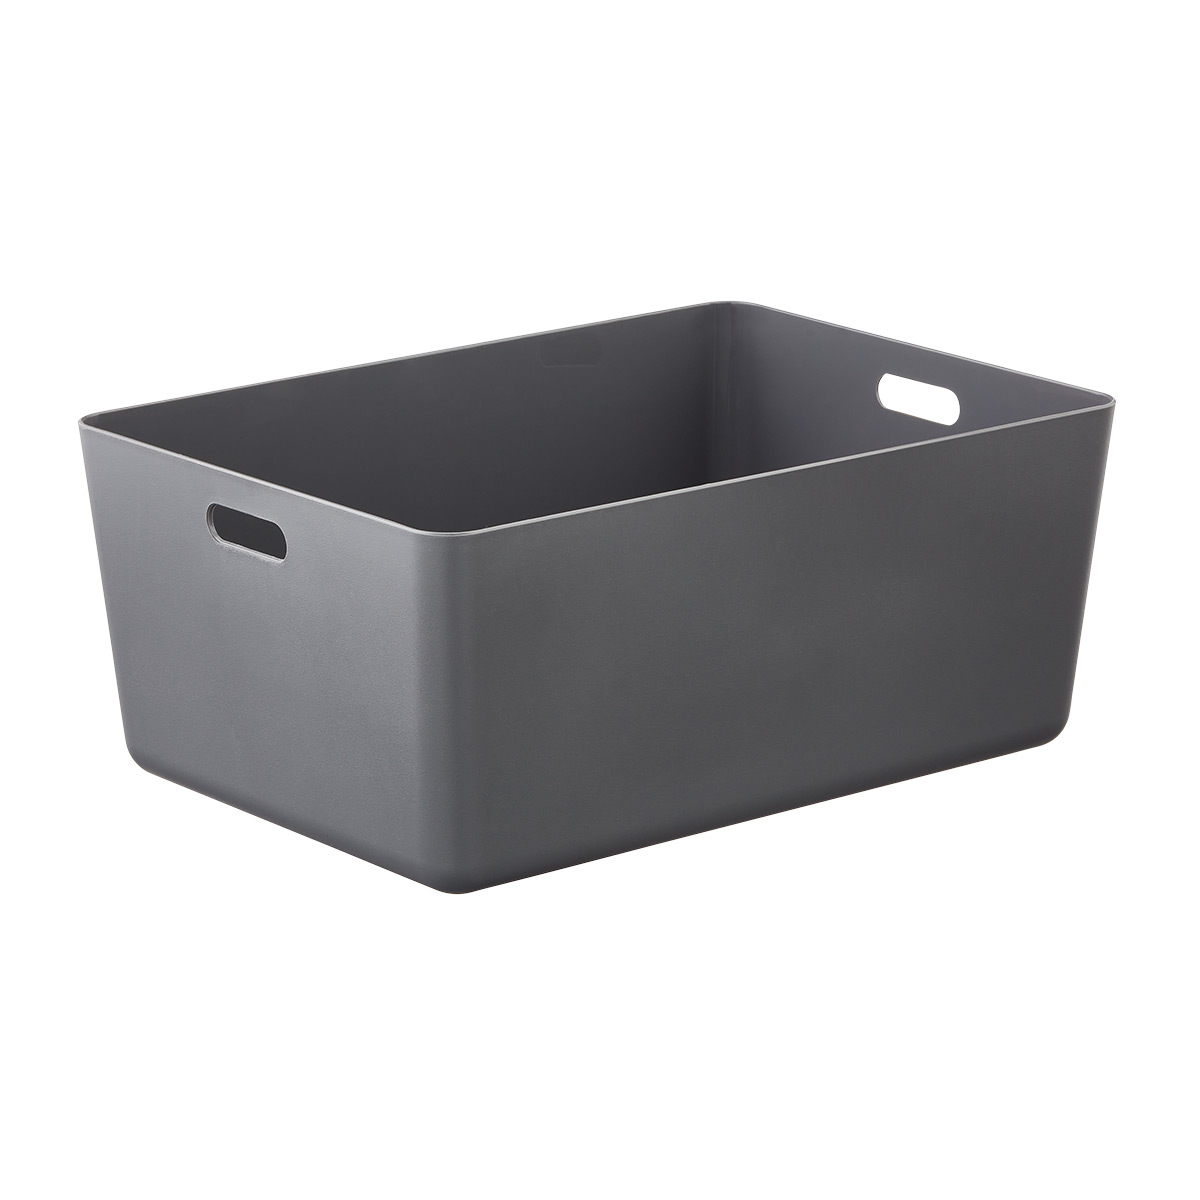 https://www.containerstore.com/catalogimages/453567/10088399_Terra_Recycled_Plastic_Larg.jpg